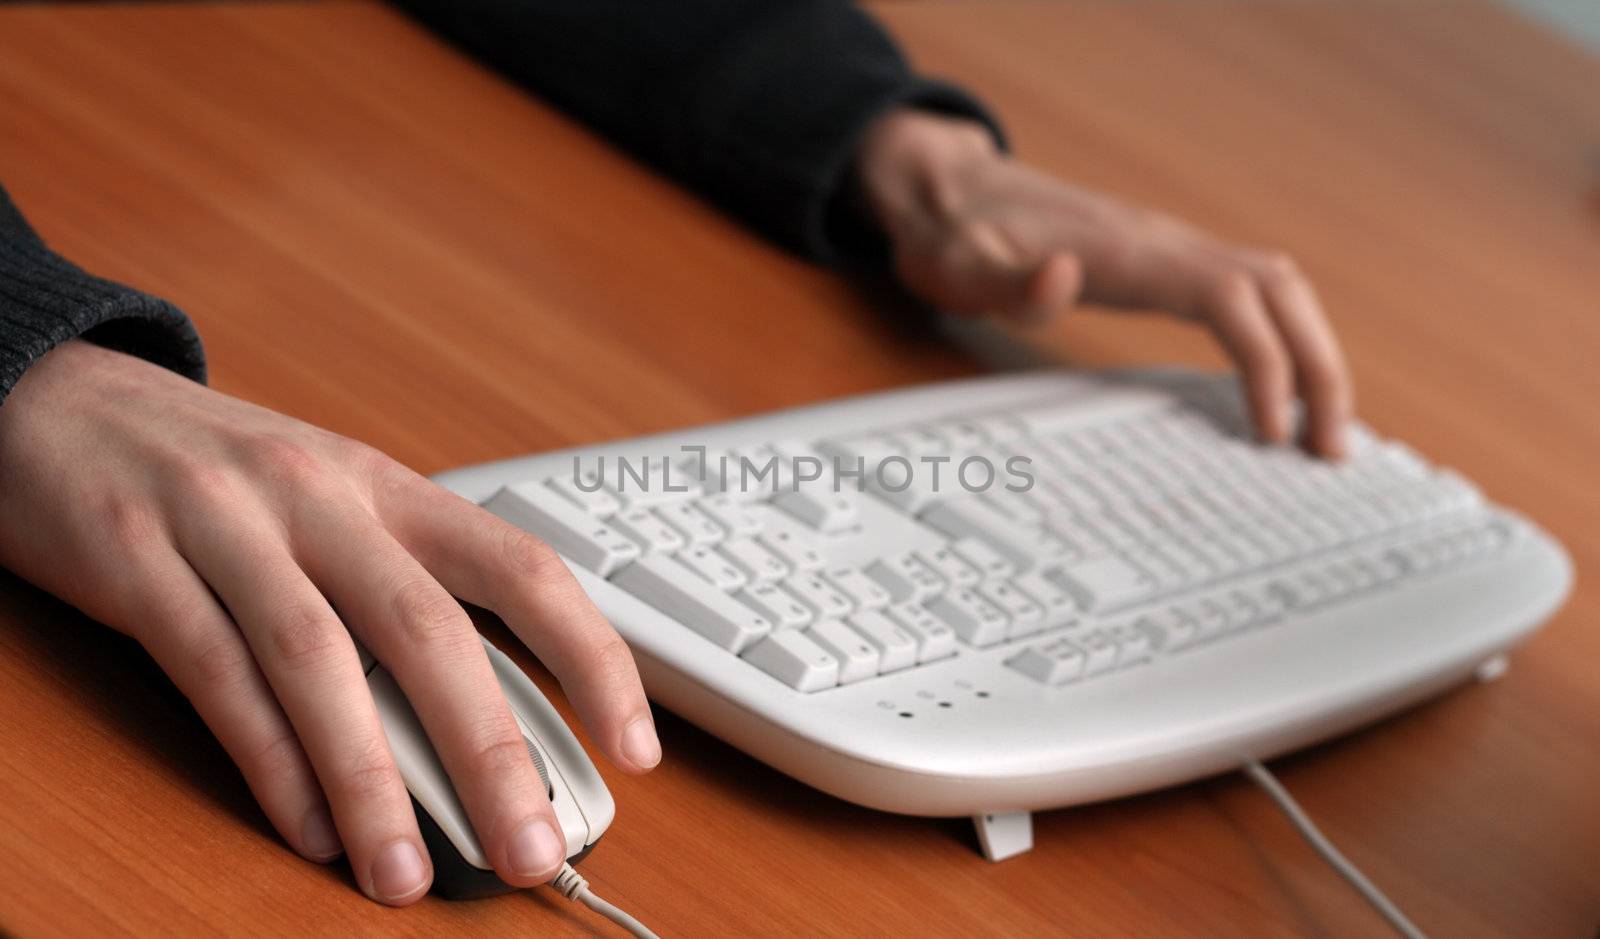 Man working with computer, with hands on mouse and keyboard, focus on the mouse